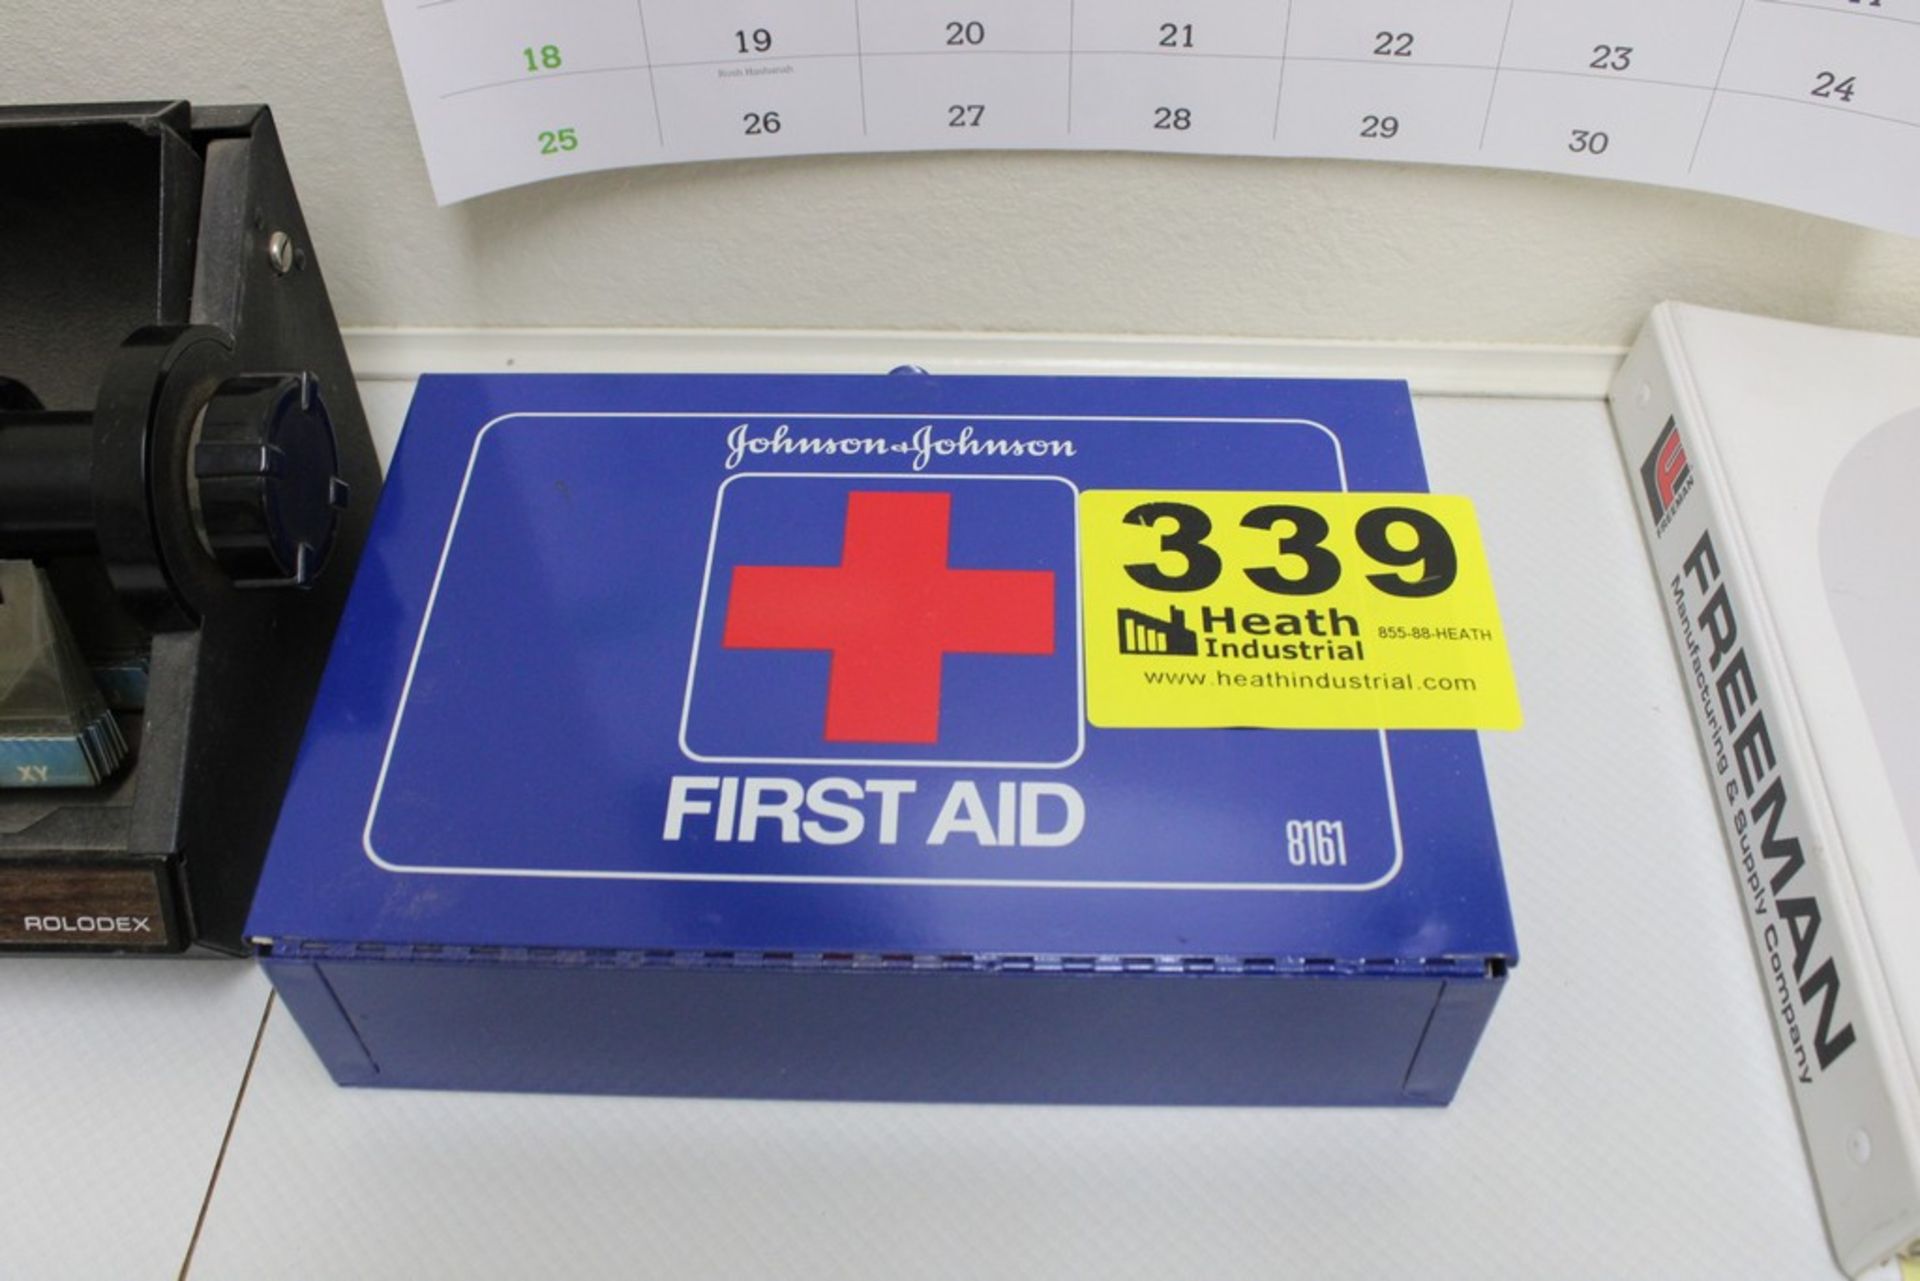 FIRST AID KIT, RECORDS BOOK & OFFICE SUPPLIES